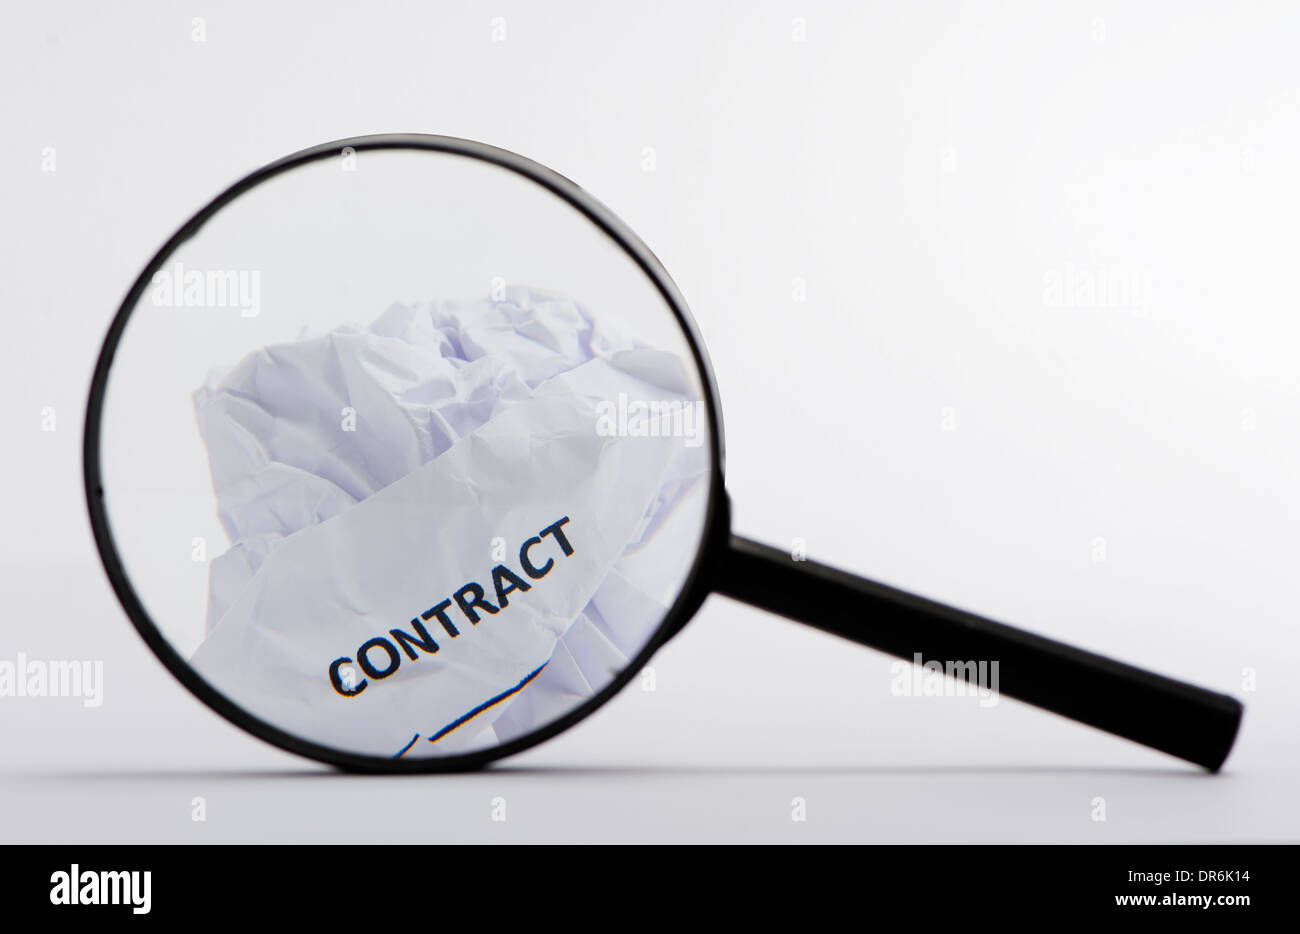 Contract On A Crumpled Ball Of Paper Viewed Through Magnifying Glass Stock Photo